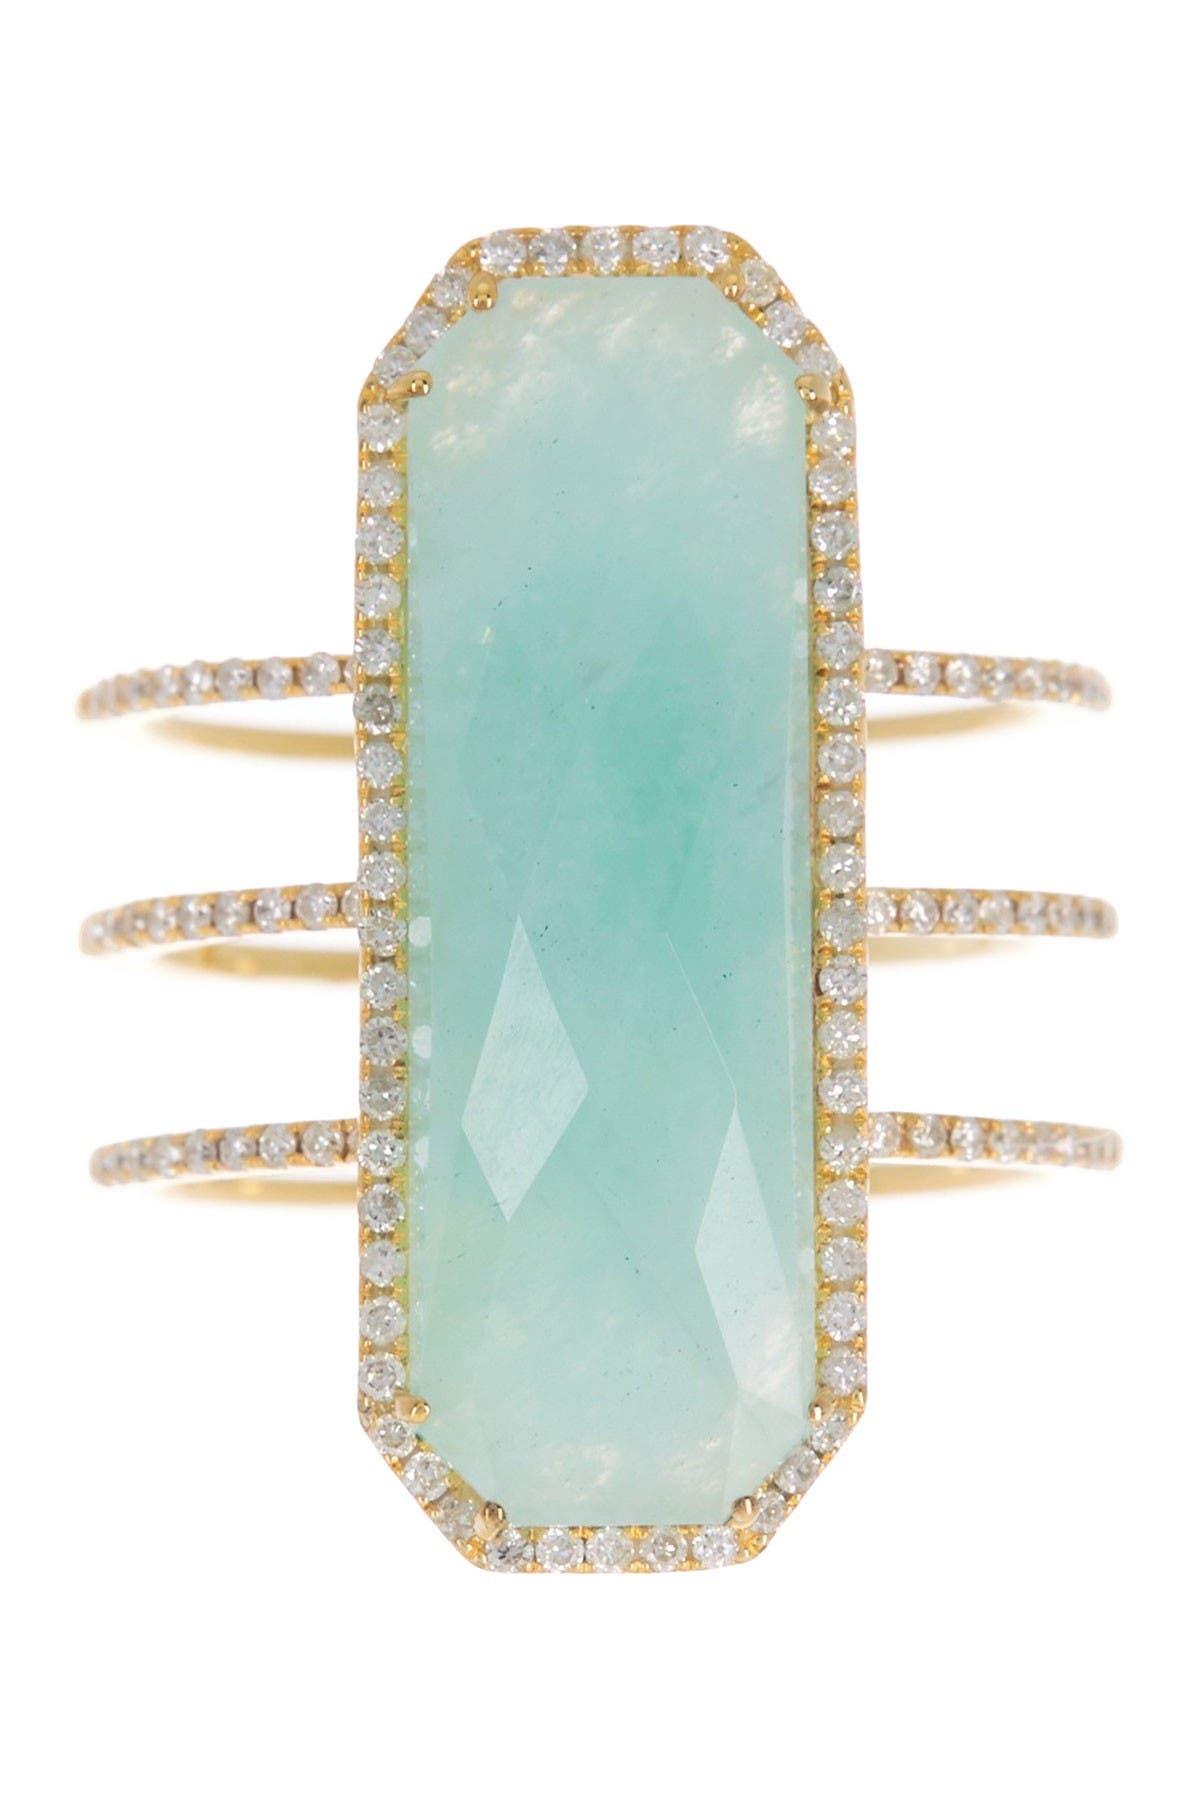 Meira T 14k Yellow Gold Amazonite Open Band Ring